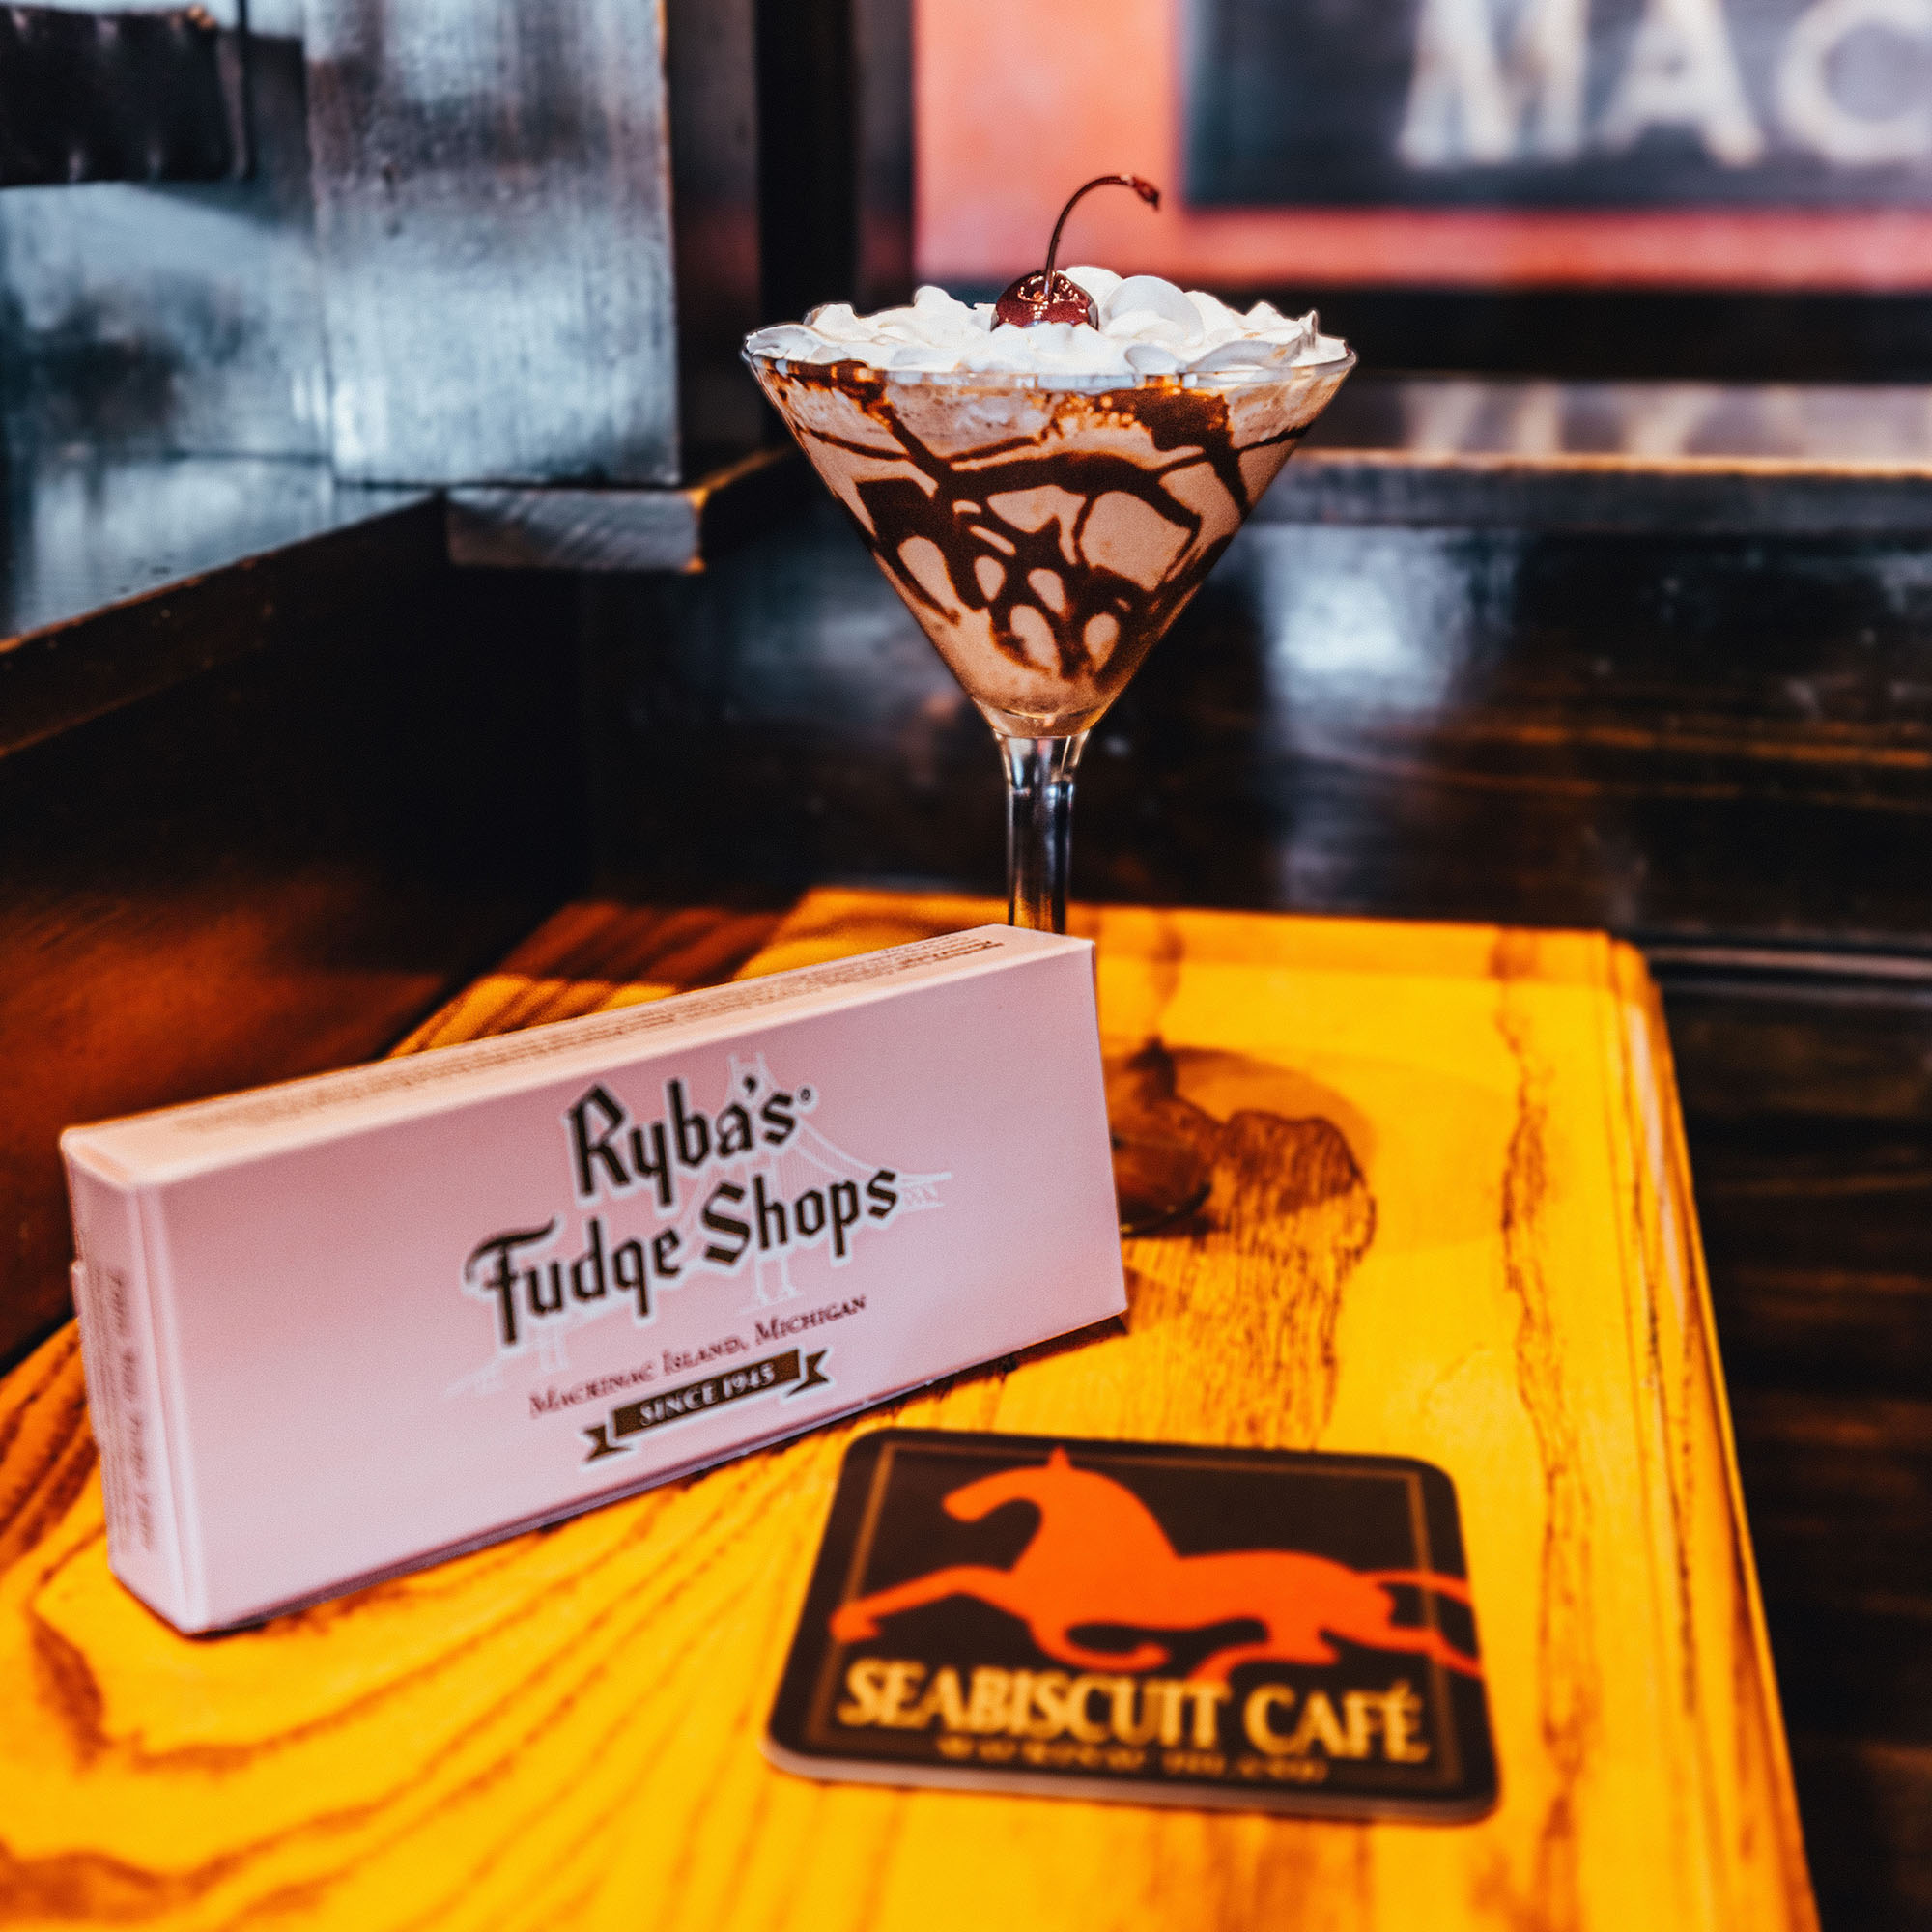 Fudge Festival 2022 - Featuring Fudge from Ryba's Mackinac Island Fudge and a Fudge Martini from Seabiscuit Cafe